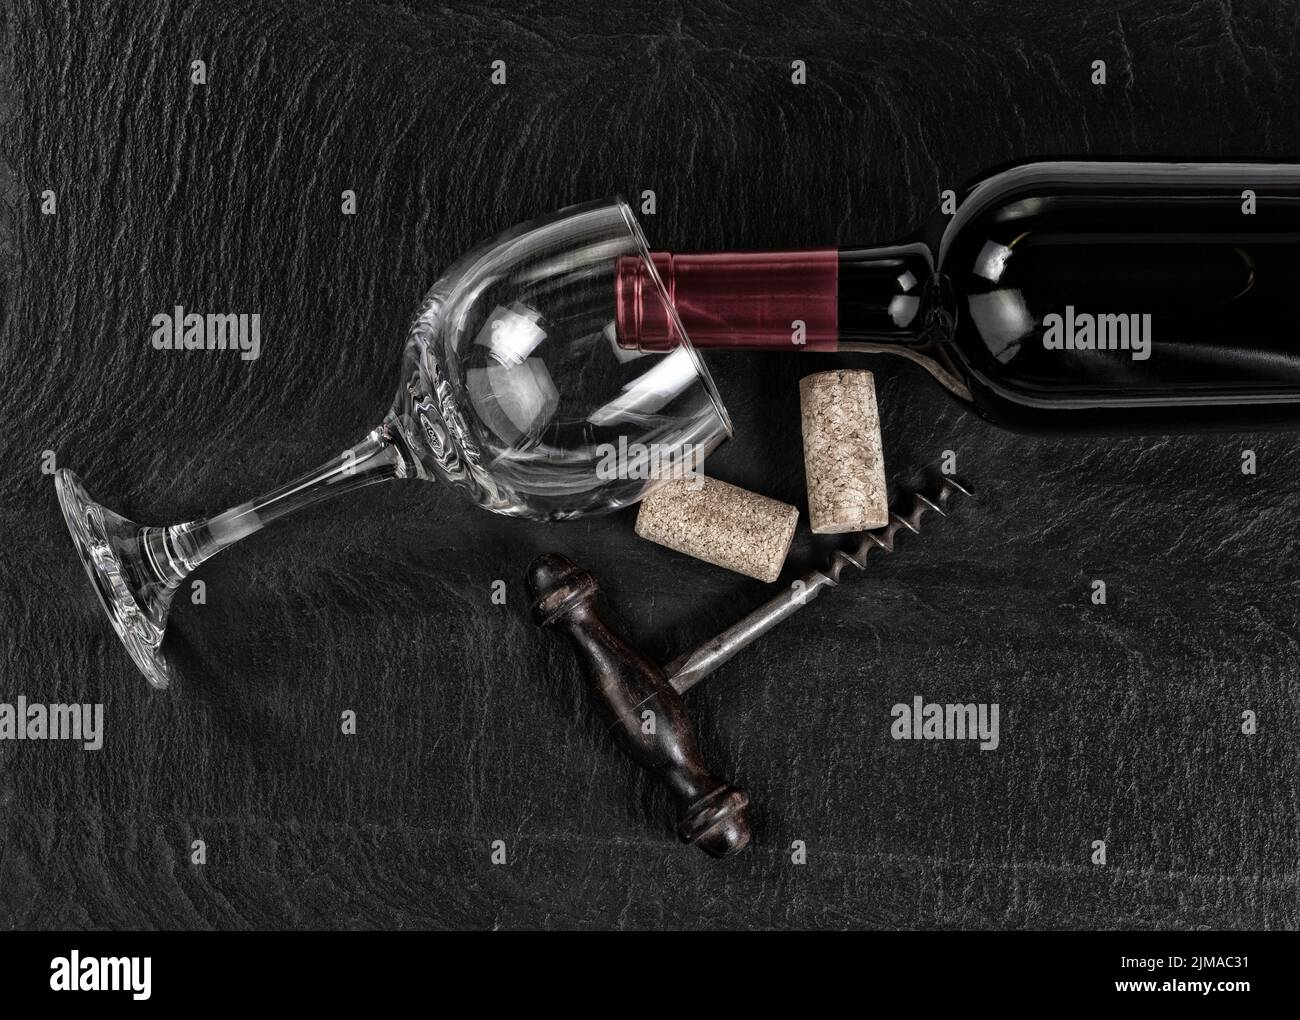 Overhead view of vintage corkscrew with red wine bottle and glass on black slate background Stock Photo